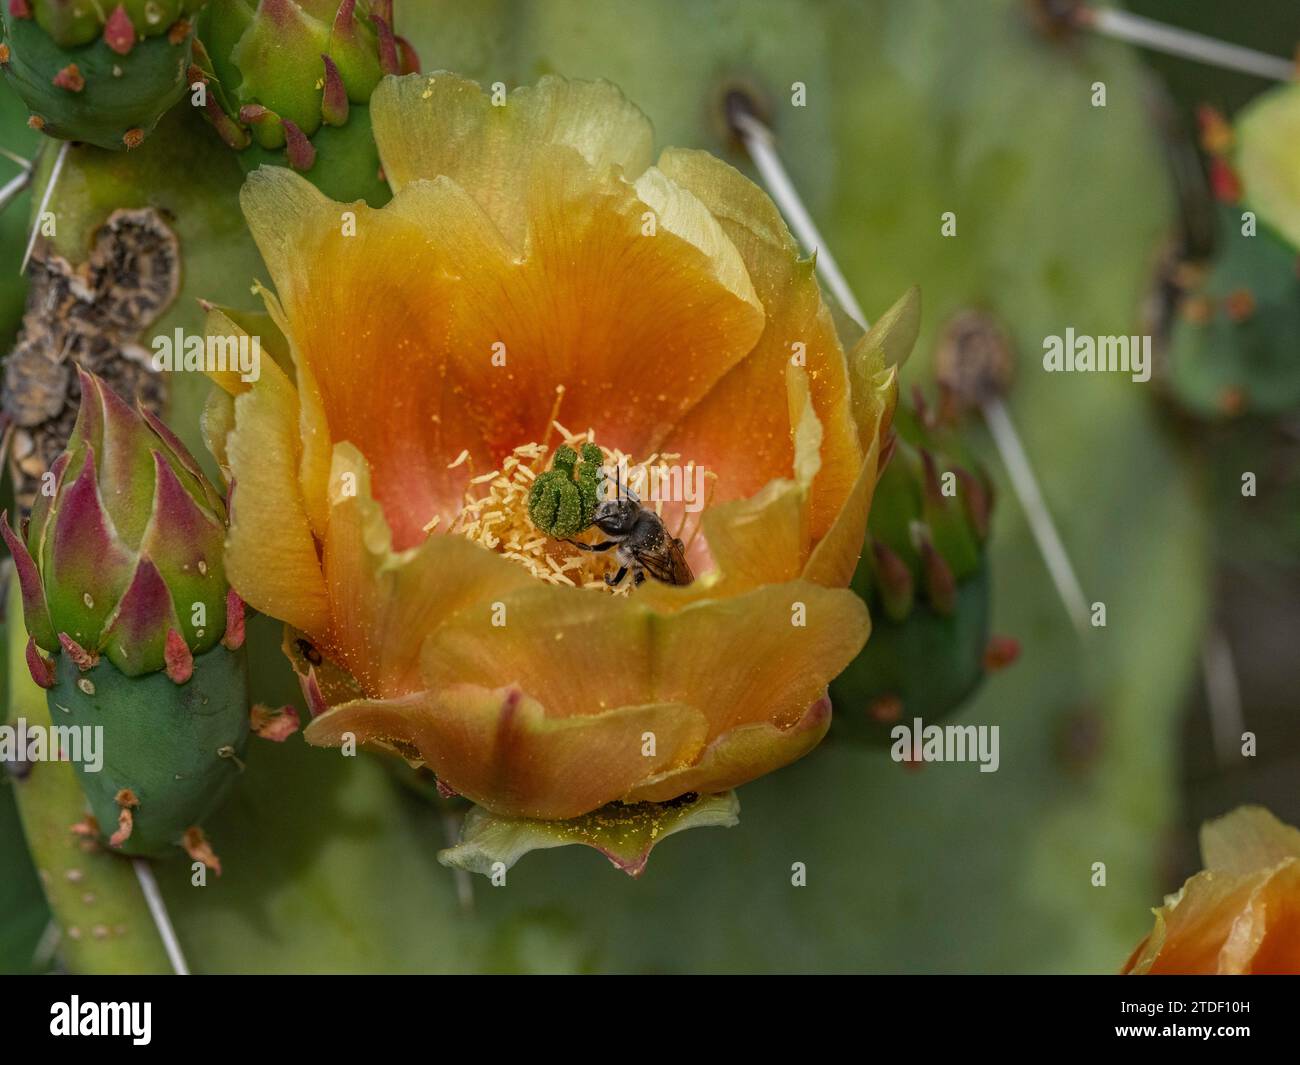 A flowering blind pricklypear cactus (Opuntia rufida), Big Bend National Park, Texas, United States of America, North America Stock Photo